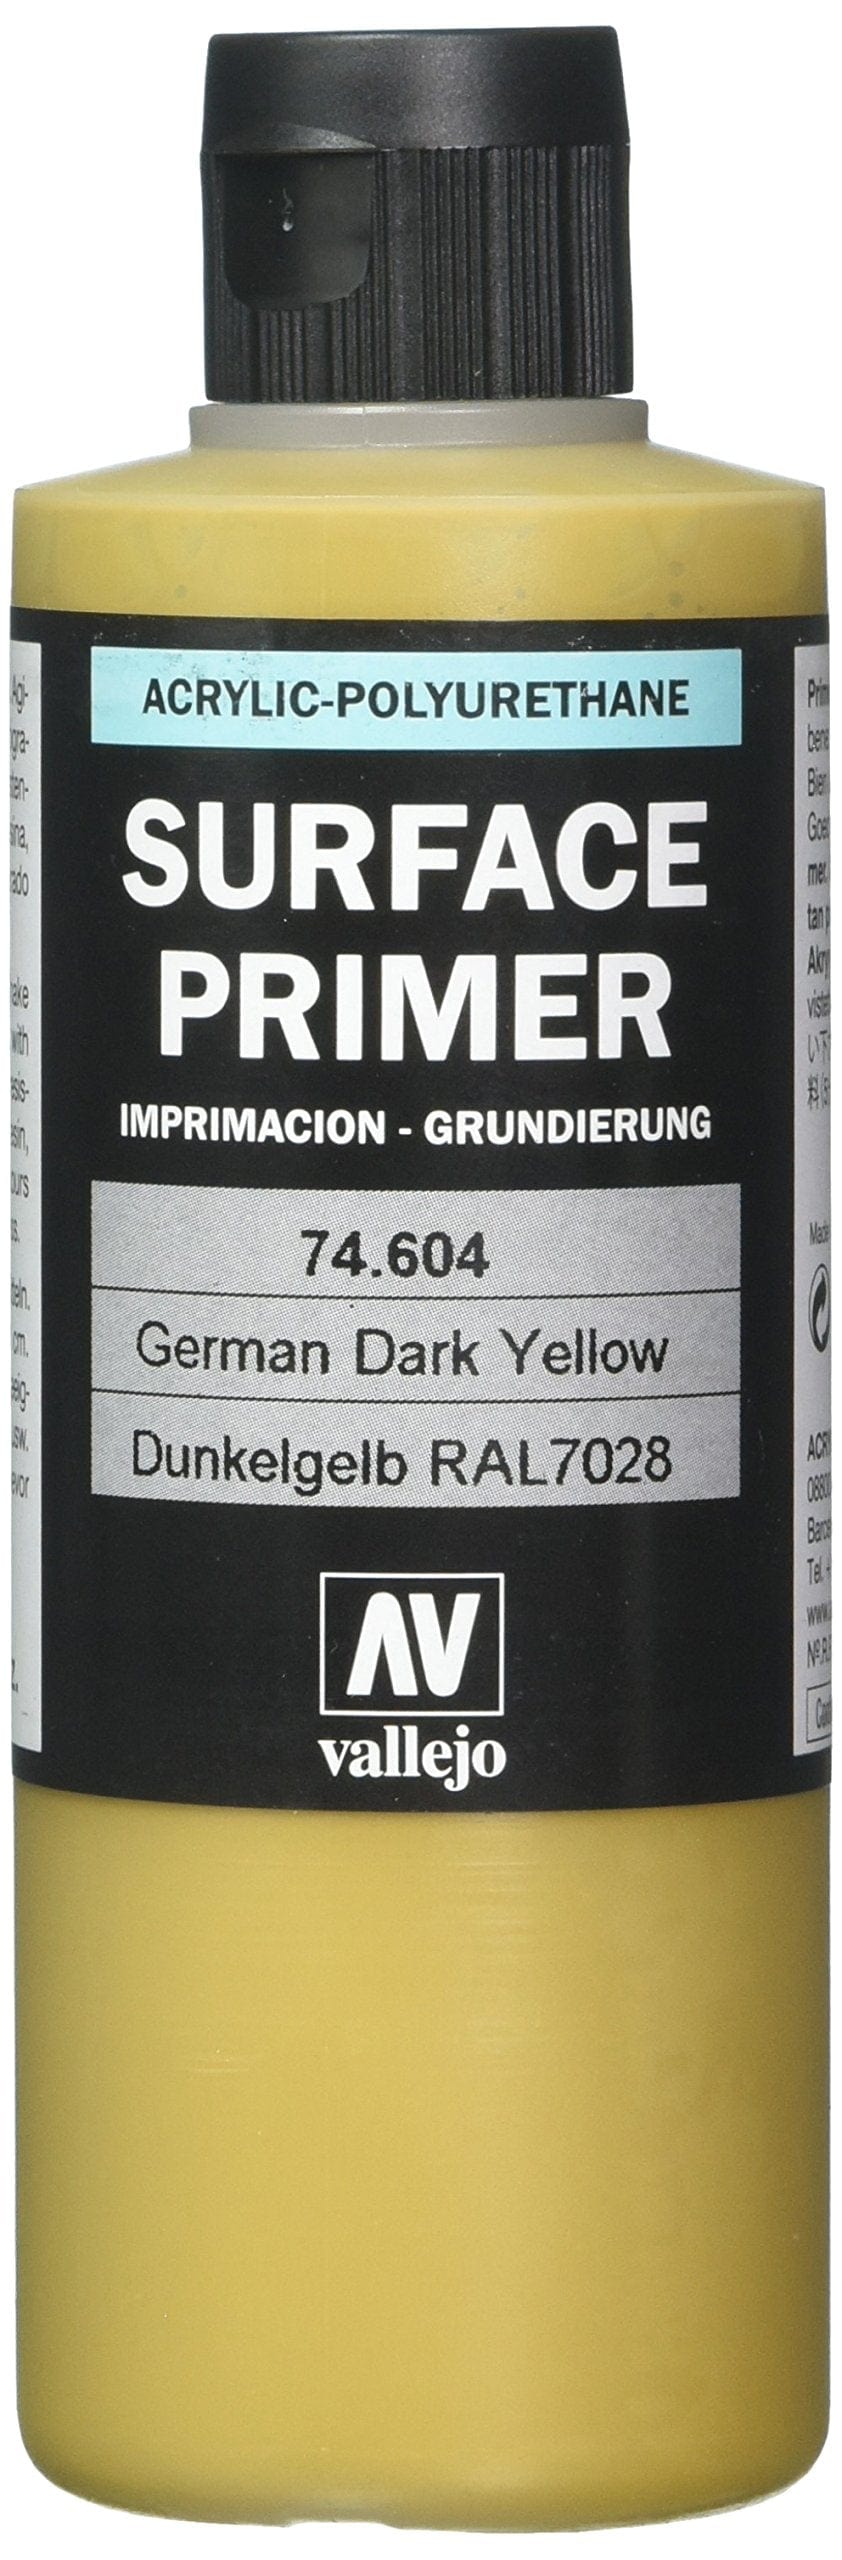 Acrylicos Vallejo, S.L. Accessories Acrylicos Vallejo Auxiliary Products: German Dark Yellow RAL 7028 (200ml)